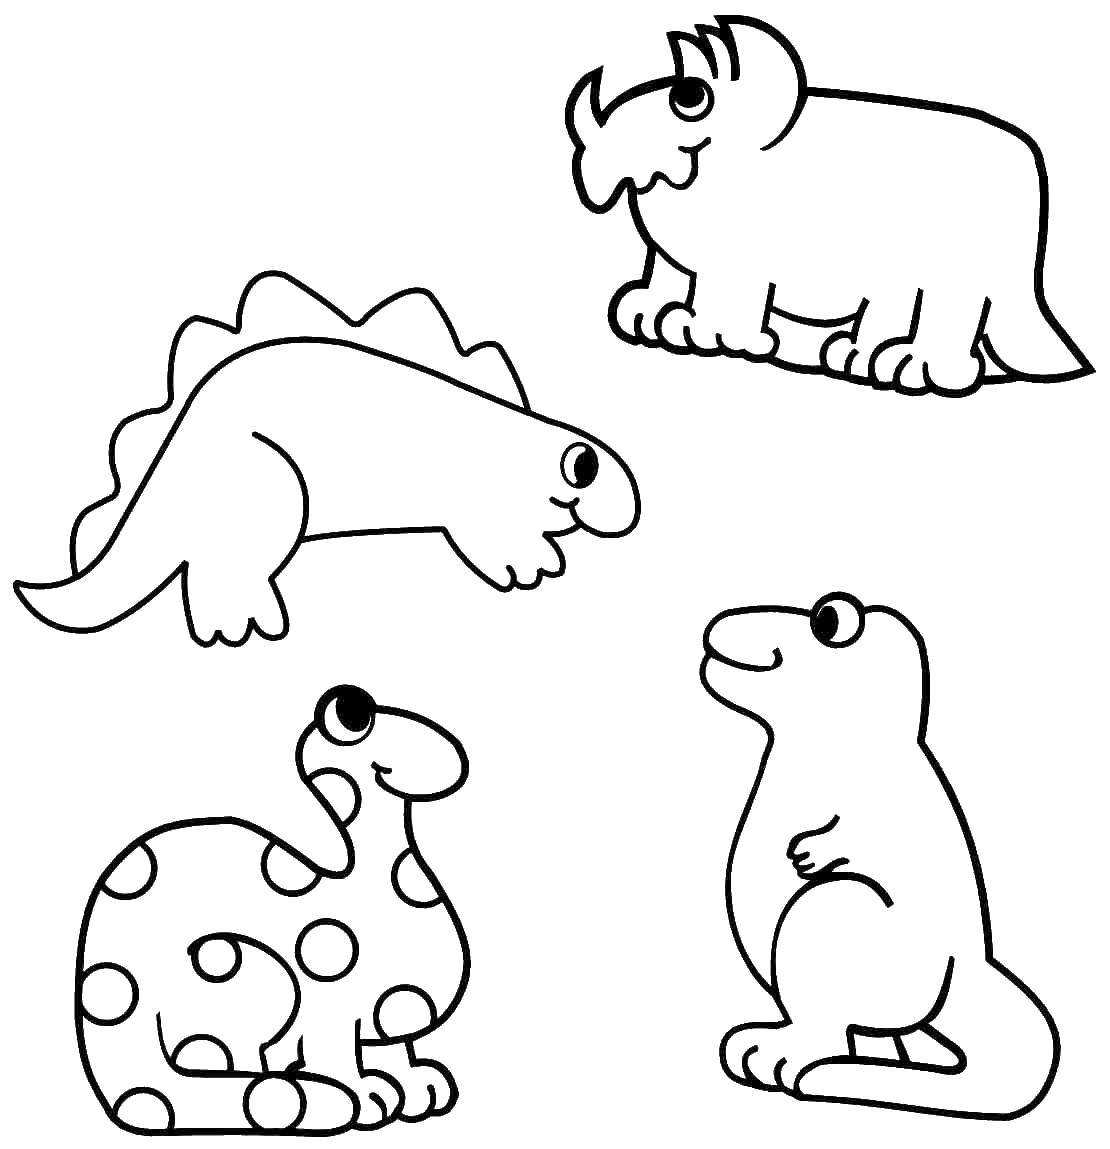 Coloring Animals. Category nature. Tags:  nature , Pets, animals.